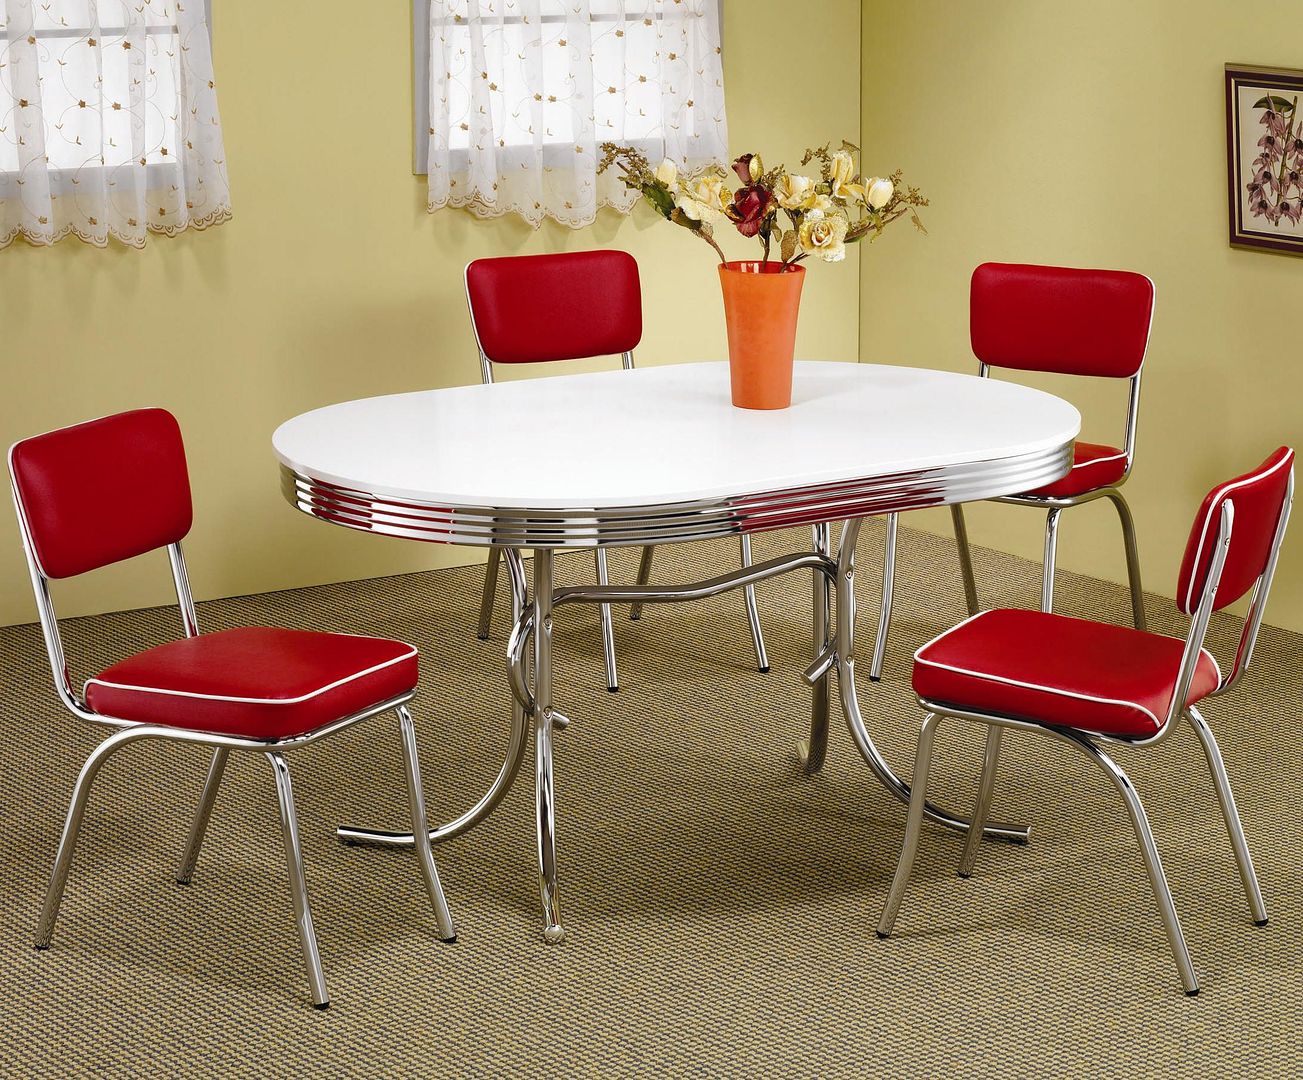 Retro 1950's Oval Dining Table and Red Chair 5 Piece Set by Coaster